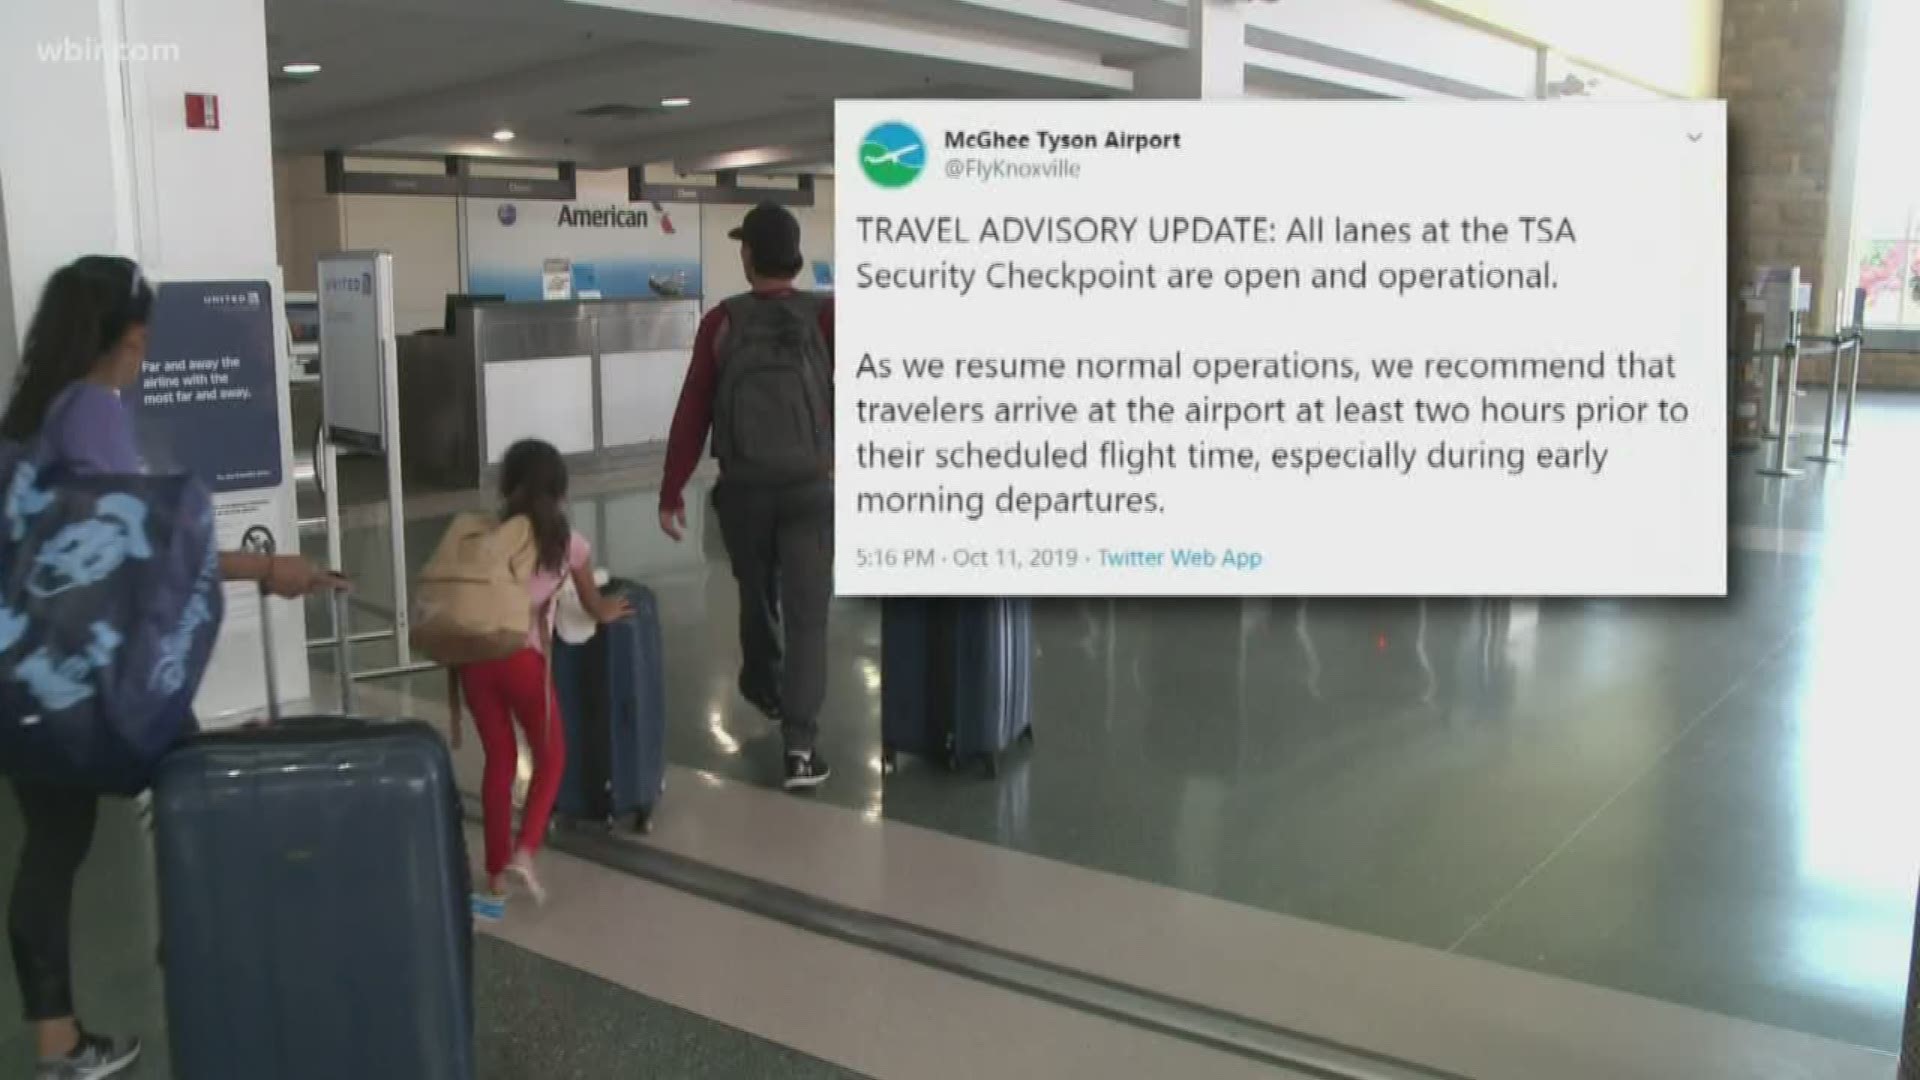 The airport said TSA Security Checkpoints are now open again after a power outage left screening equipment inoperable.